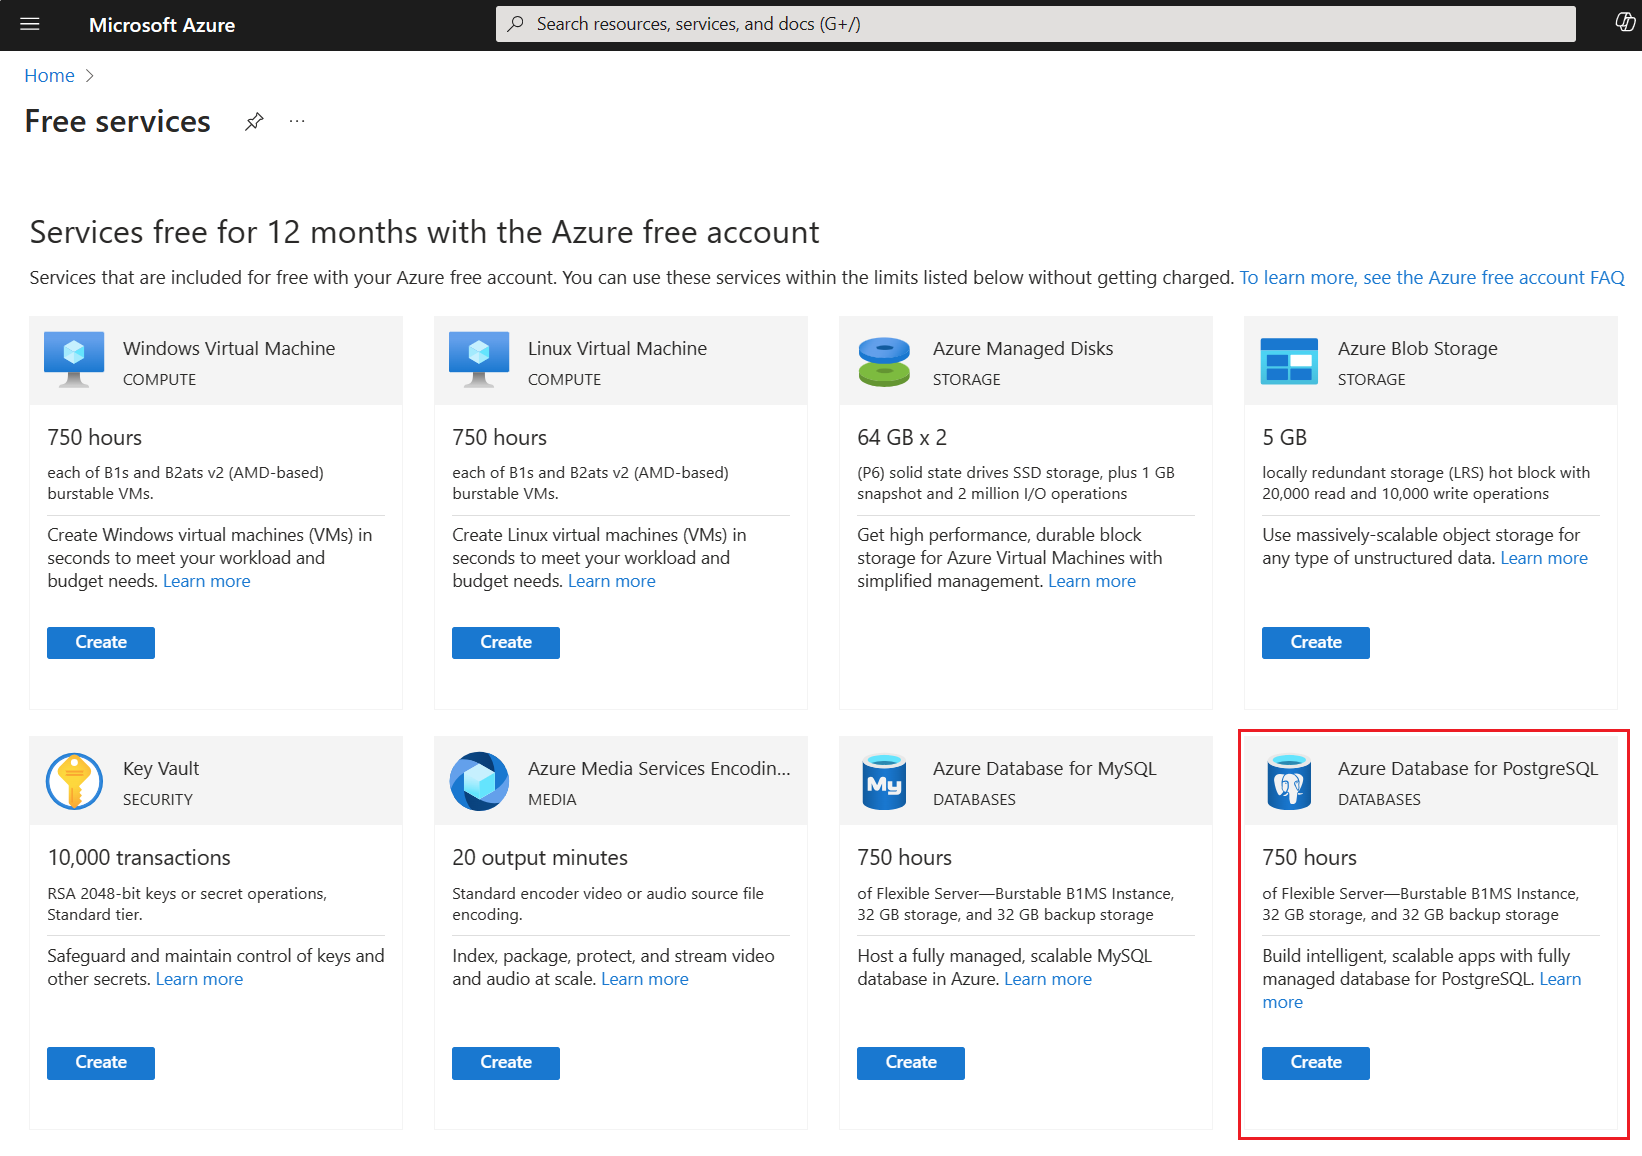 Screenshot that shows a list of all free services on the Azure portal, highlighting PostgreSQL.